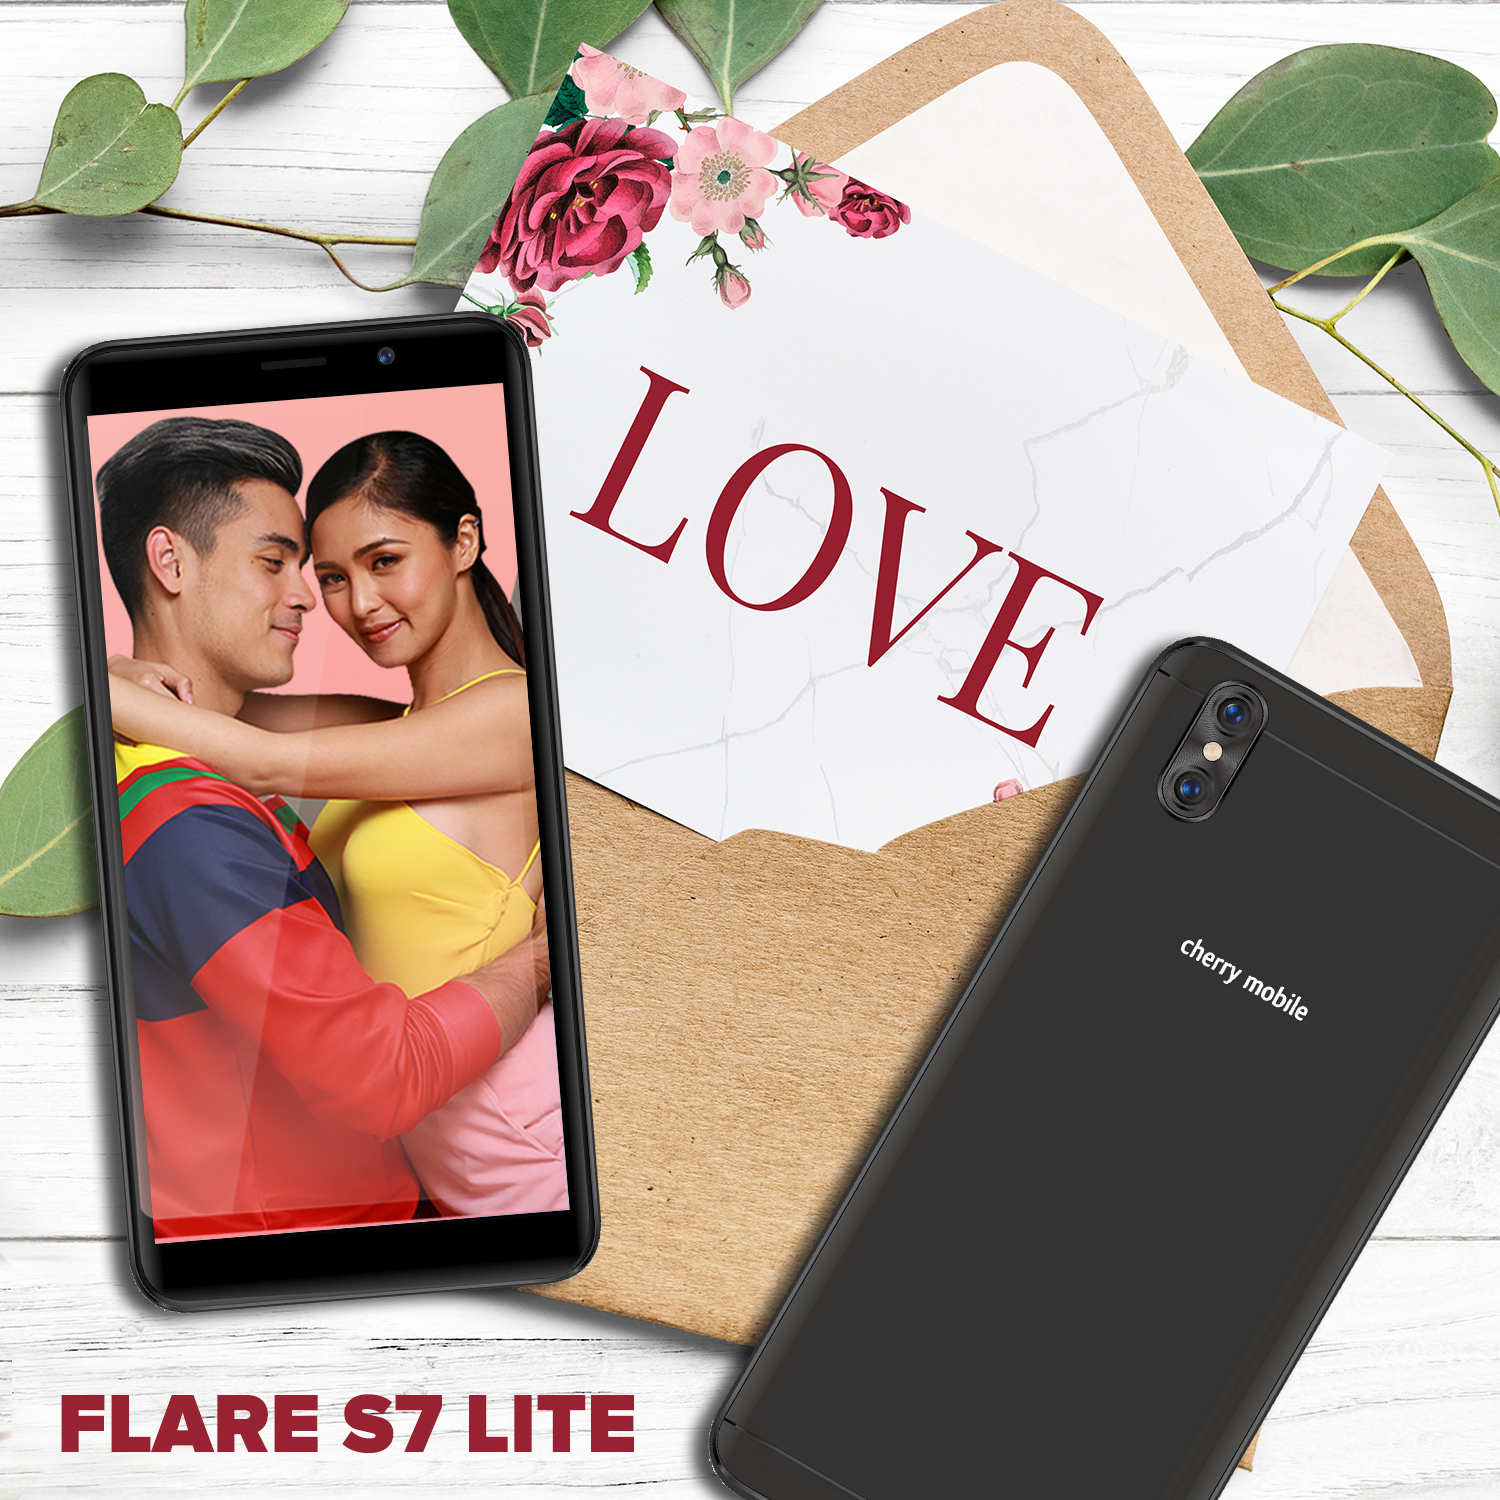 BigATen ways on how to spend ‘Feb-ibig’ with Cherry Mobile